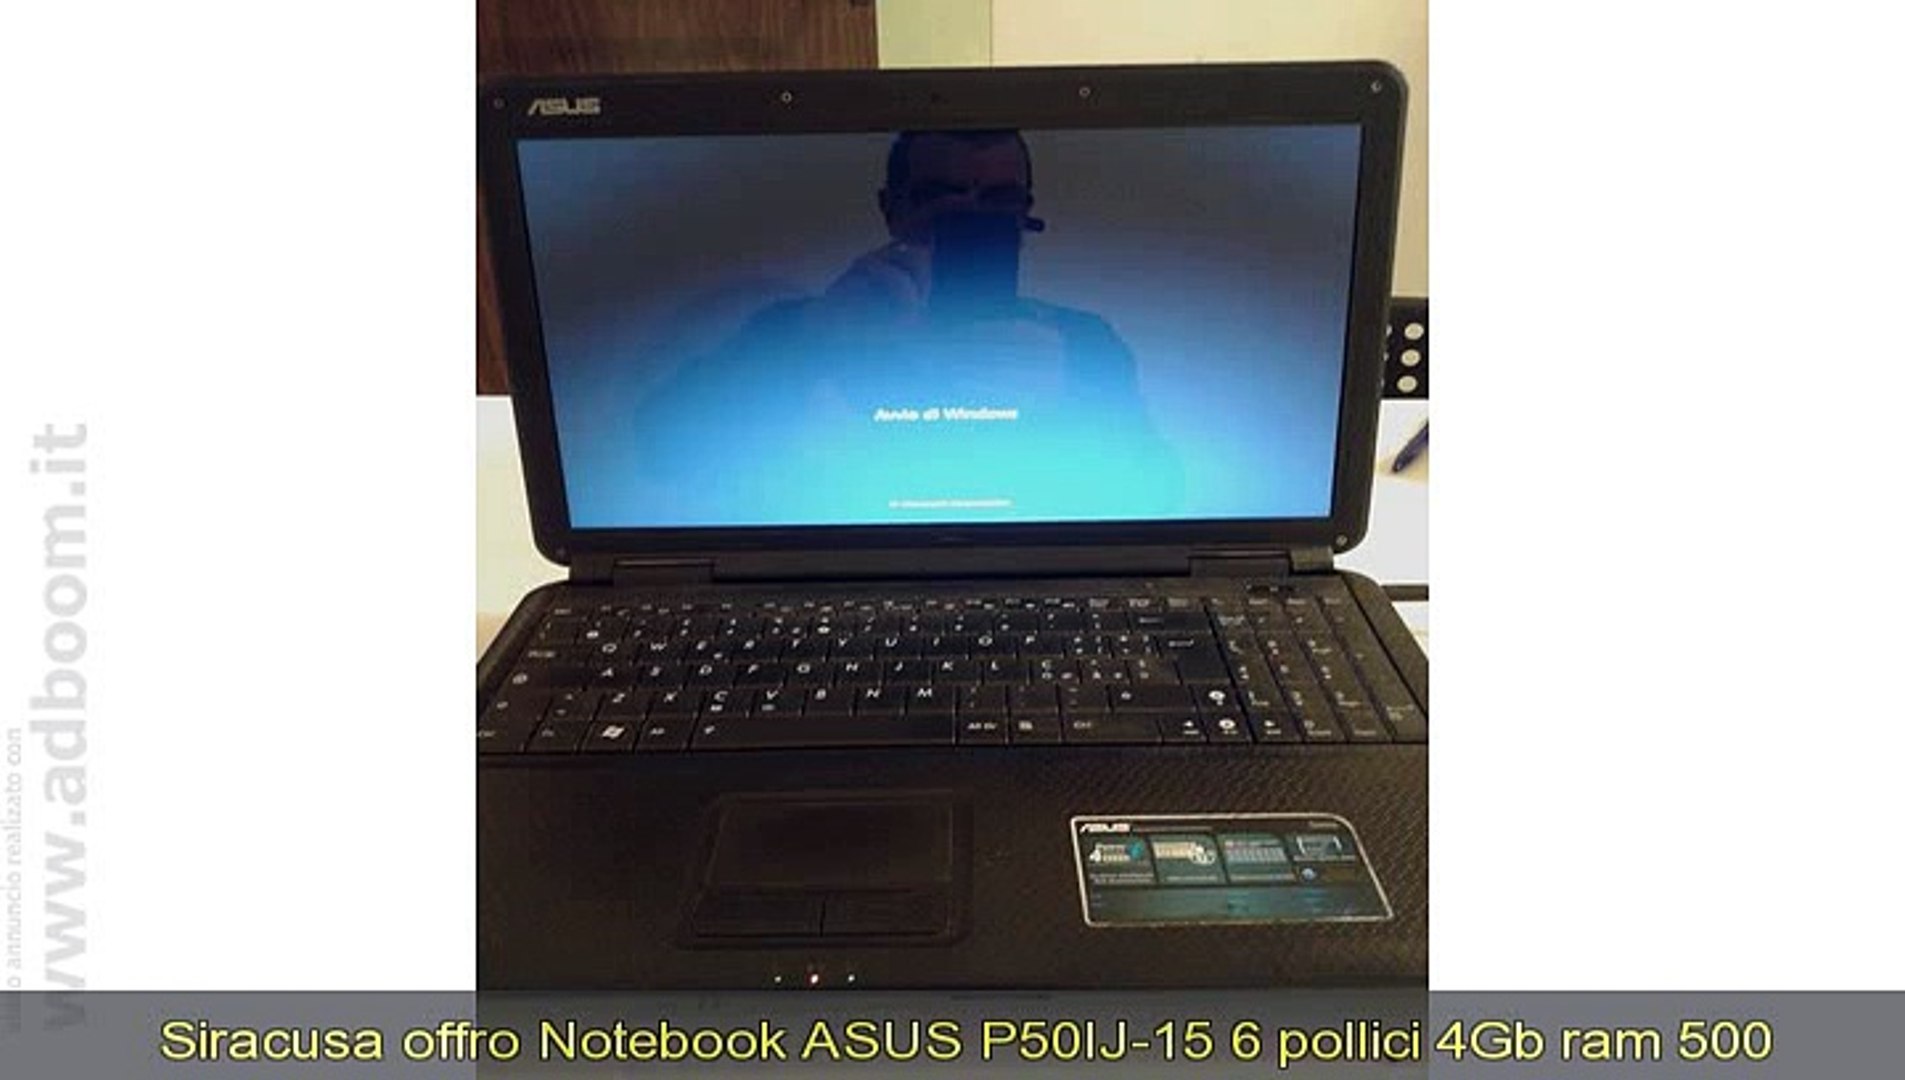 SIRACUSA, FRANCOFONTE NOTEBOOK ASUS P50IJ-15.6 POLLICI 4GB RAM 500 HDD EURO  160 - Video Dailymotion